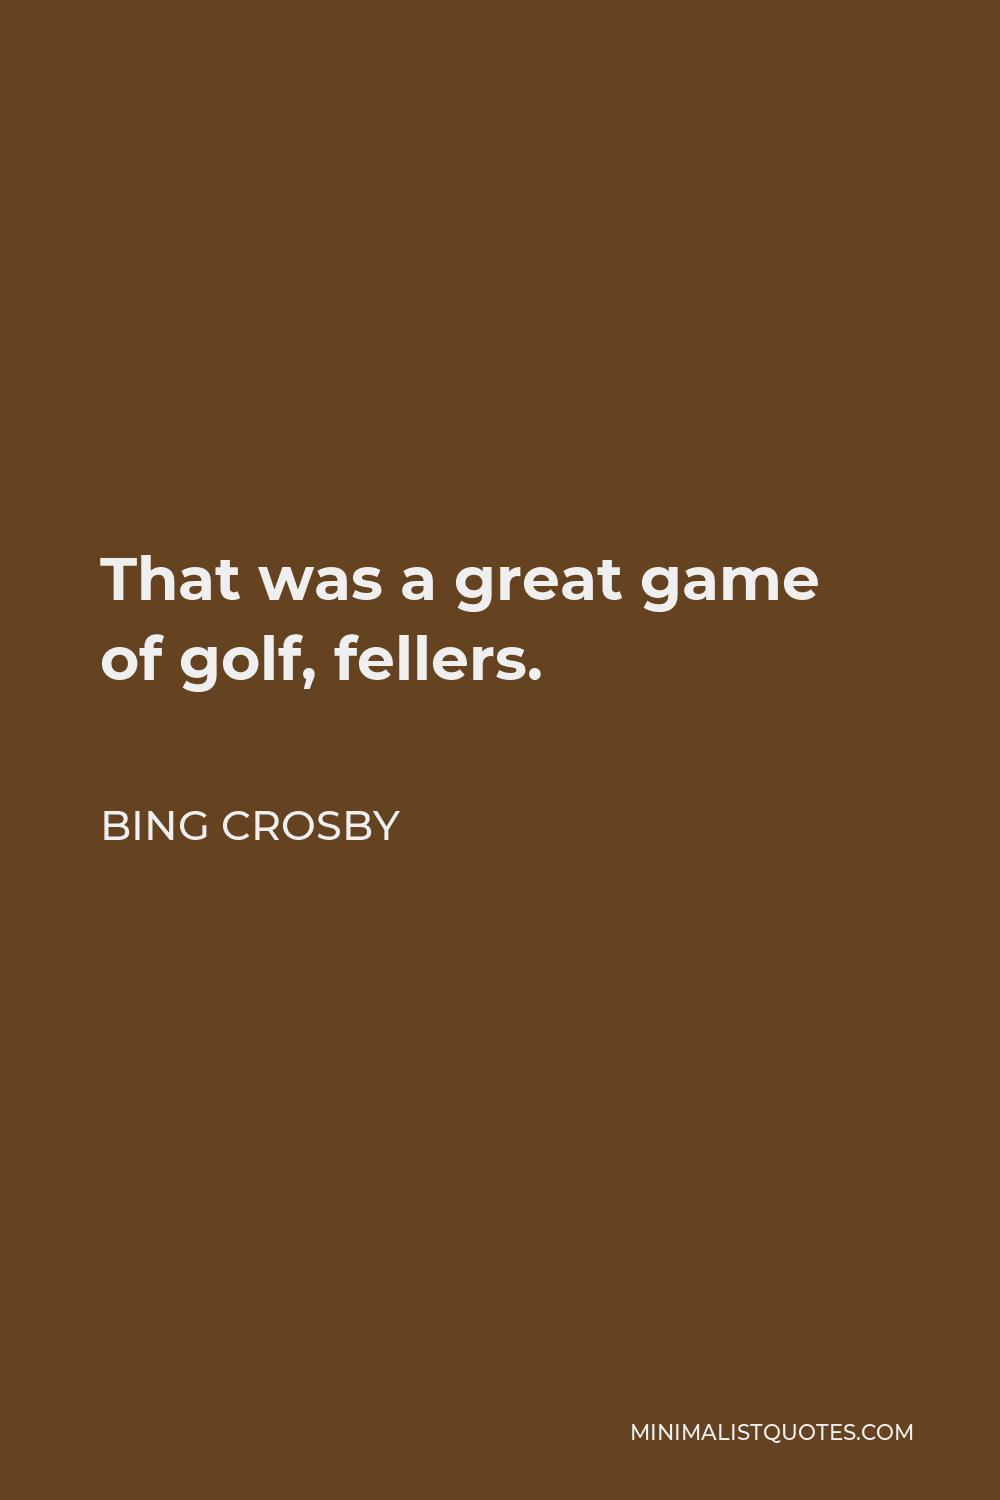 Bing Crosby Quote - That was a great game of golf, fellers.